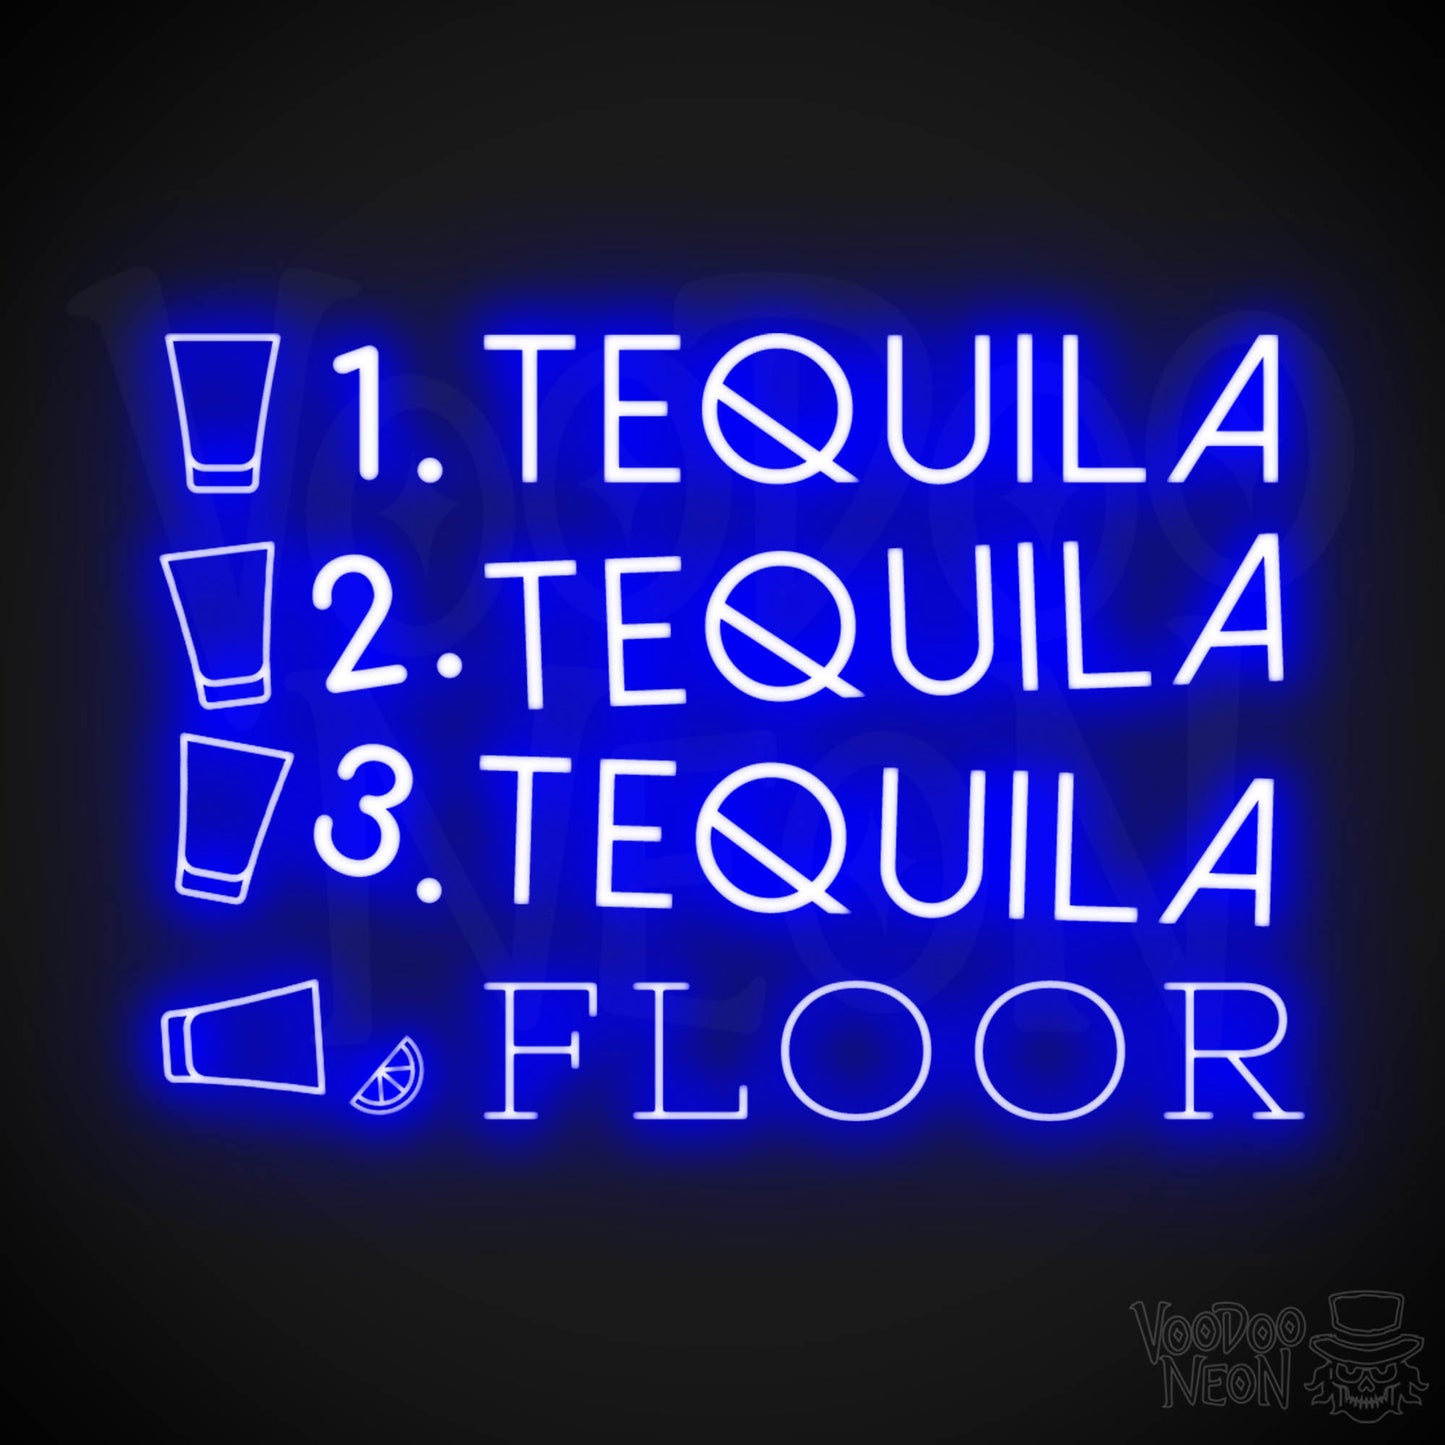 One Tequila Two Tequila Three Tequila Floor Neon sign - Neon Wall Art - Color Dark Blue